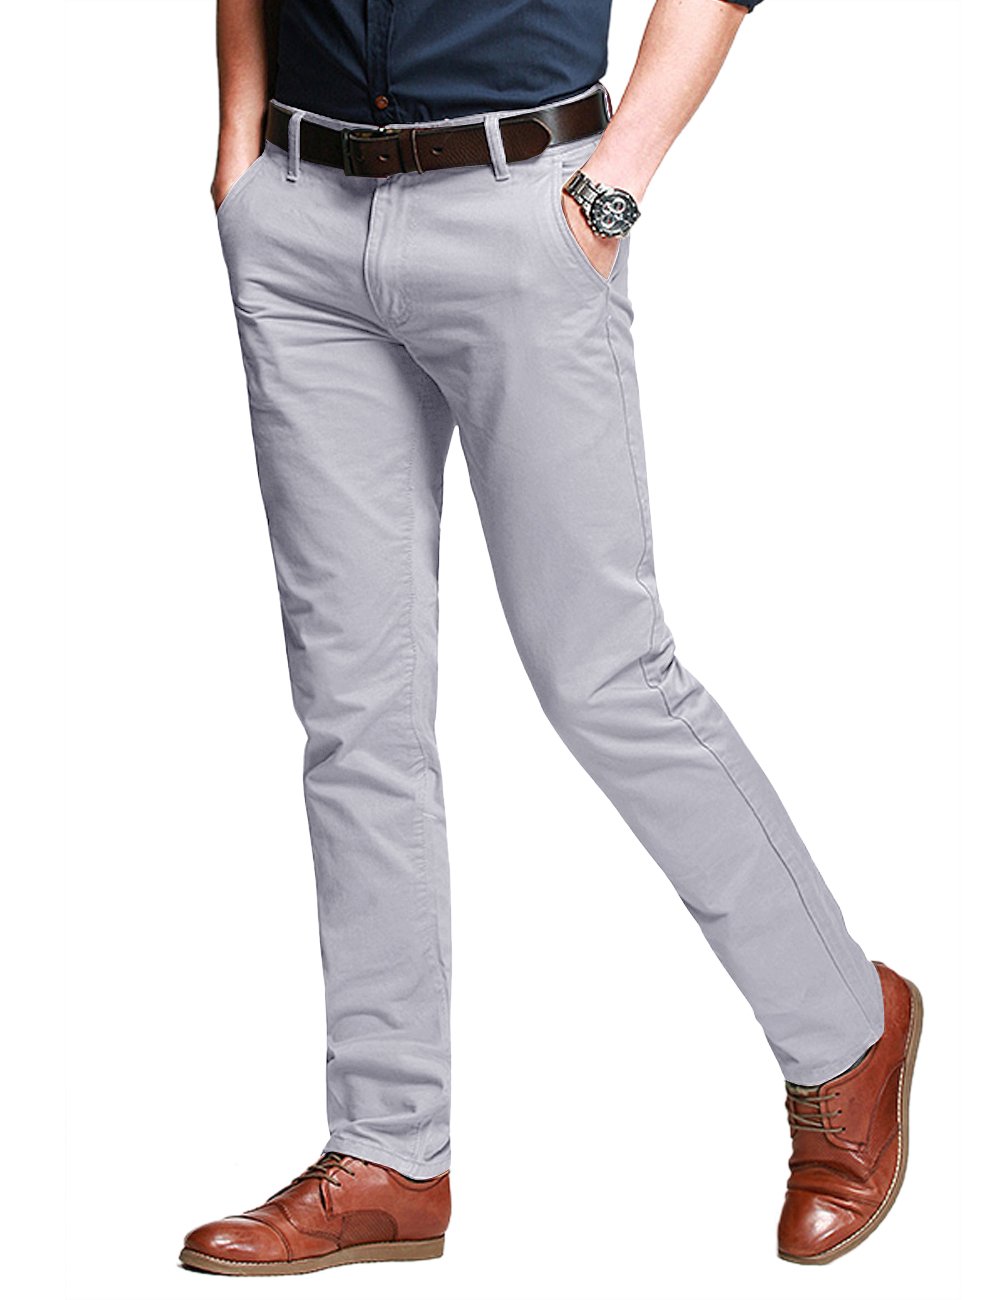 Match Mens Slim Fit Tapered Stretchy casual Pants ((42W x 31L, 8050 Light gray)